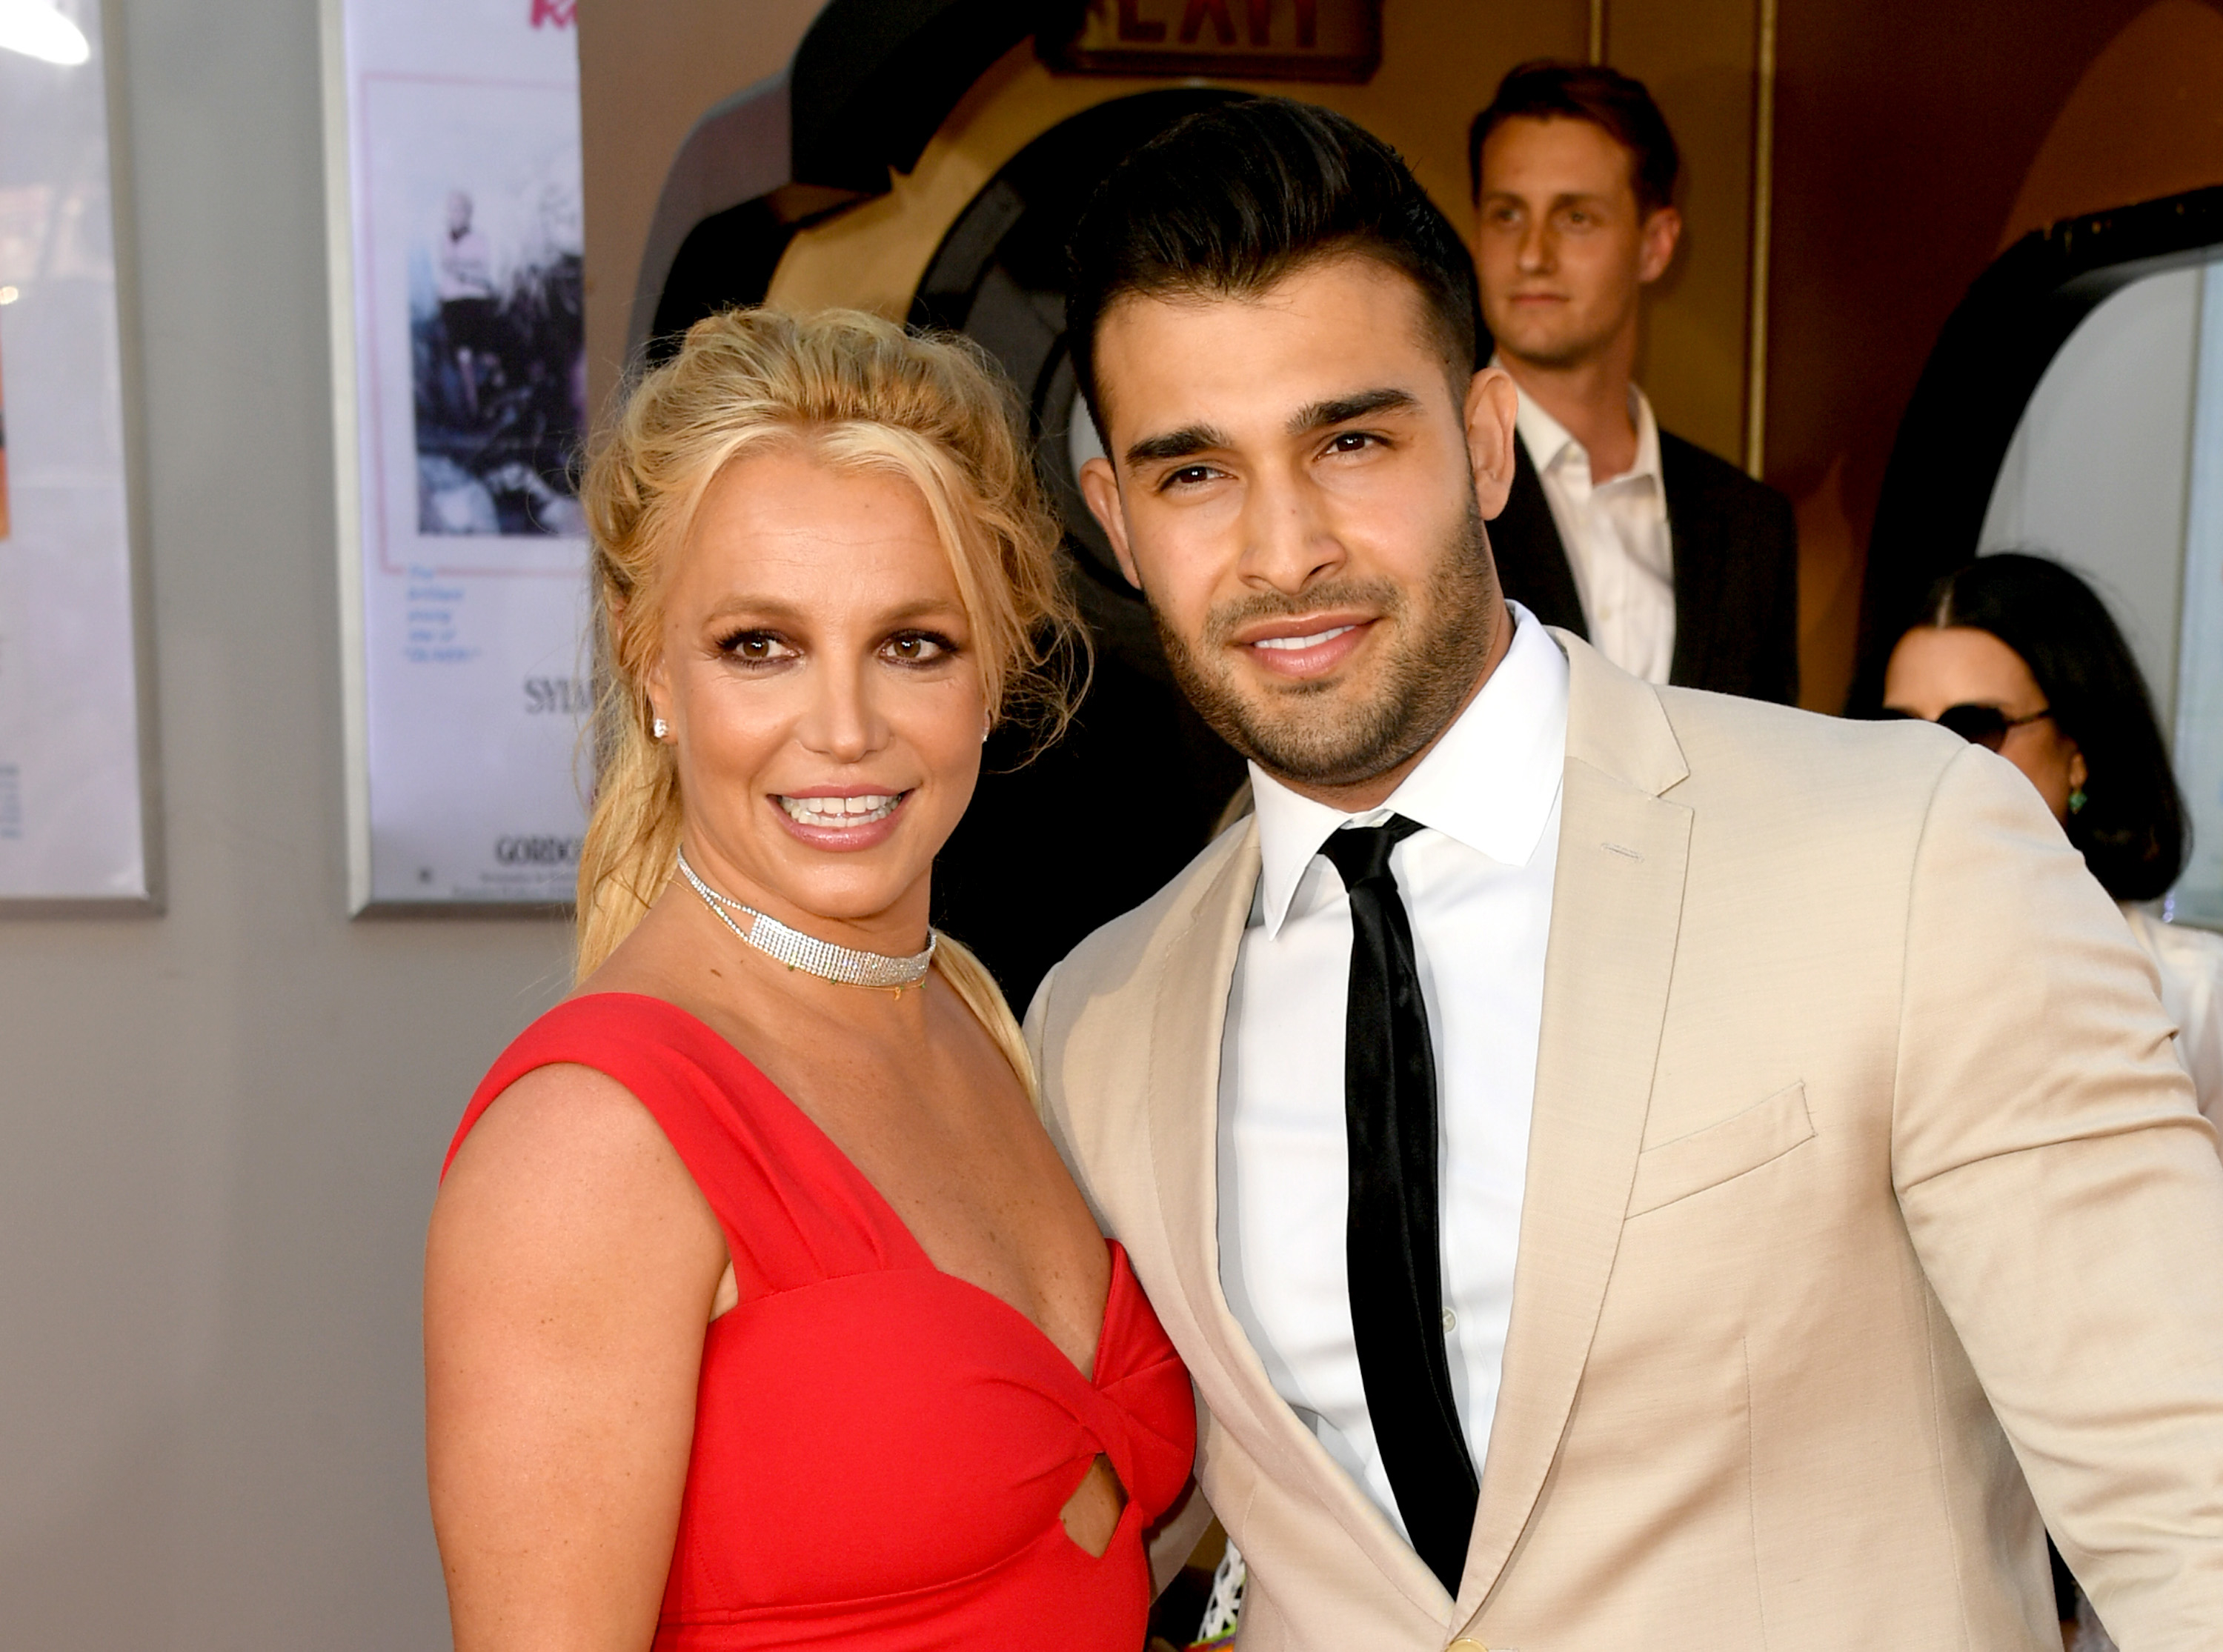 Close-up of Sam and Britney at a media event